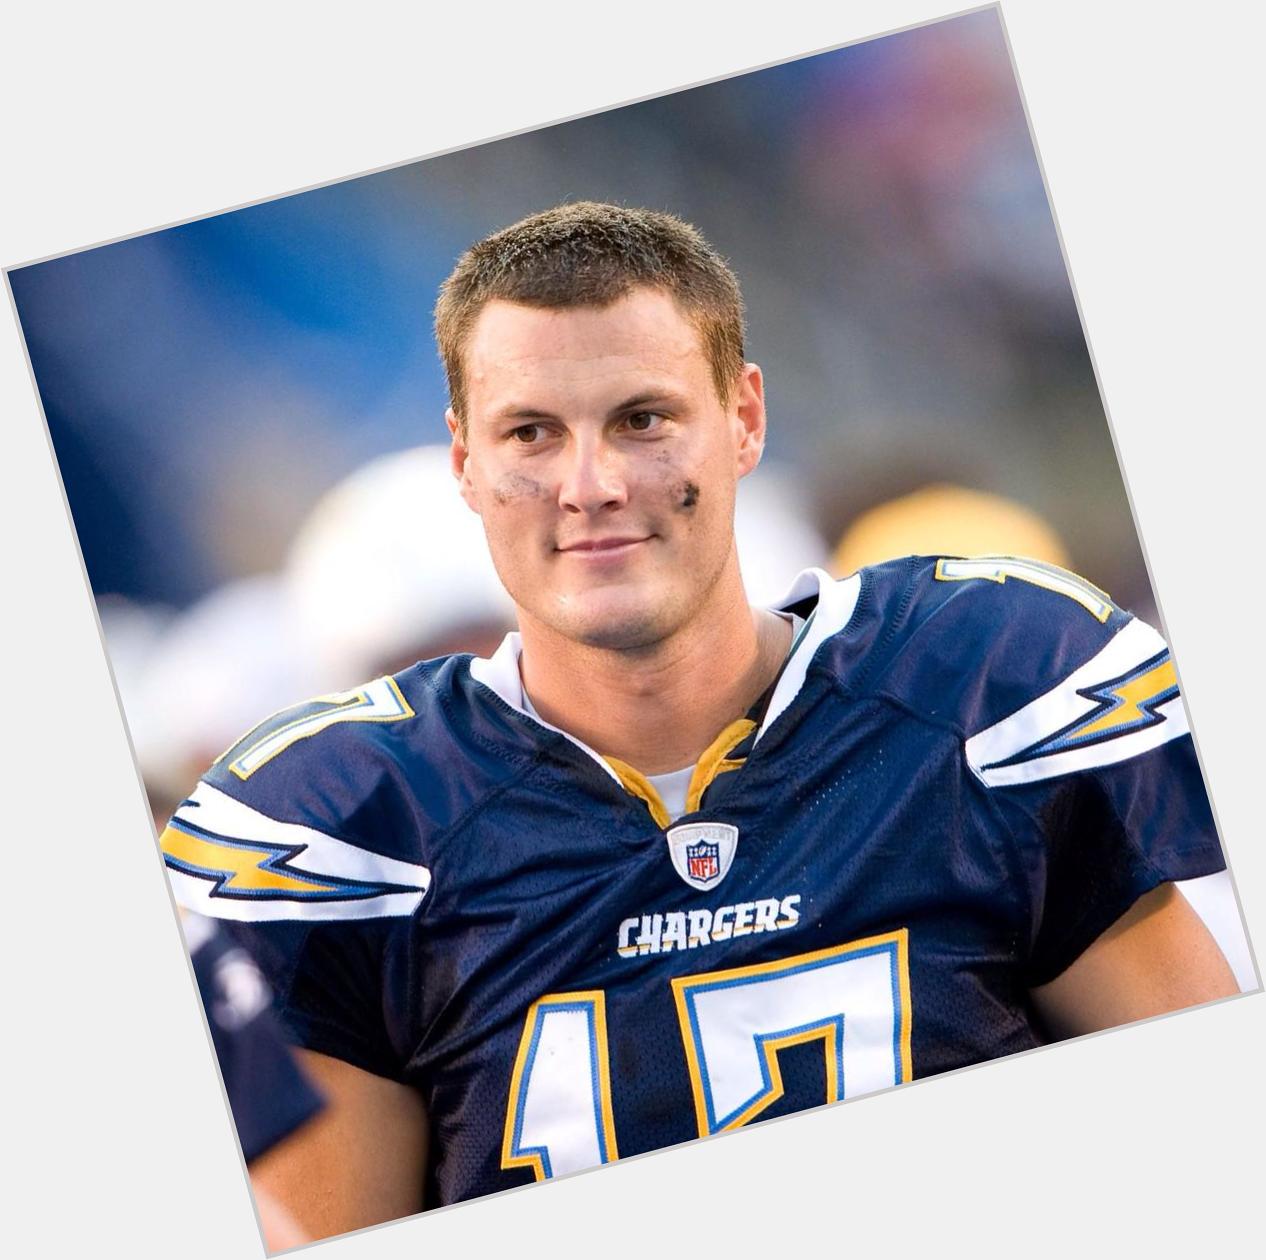 Happy birthday to THE GREATEST quarter back to play the game of football! The man, the myth, the legend Philip Rivers 